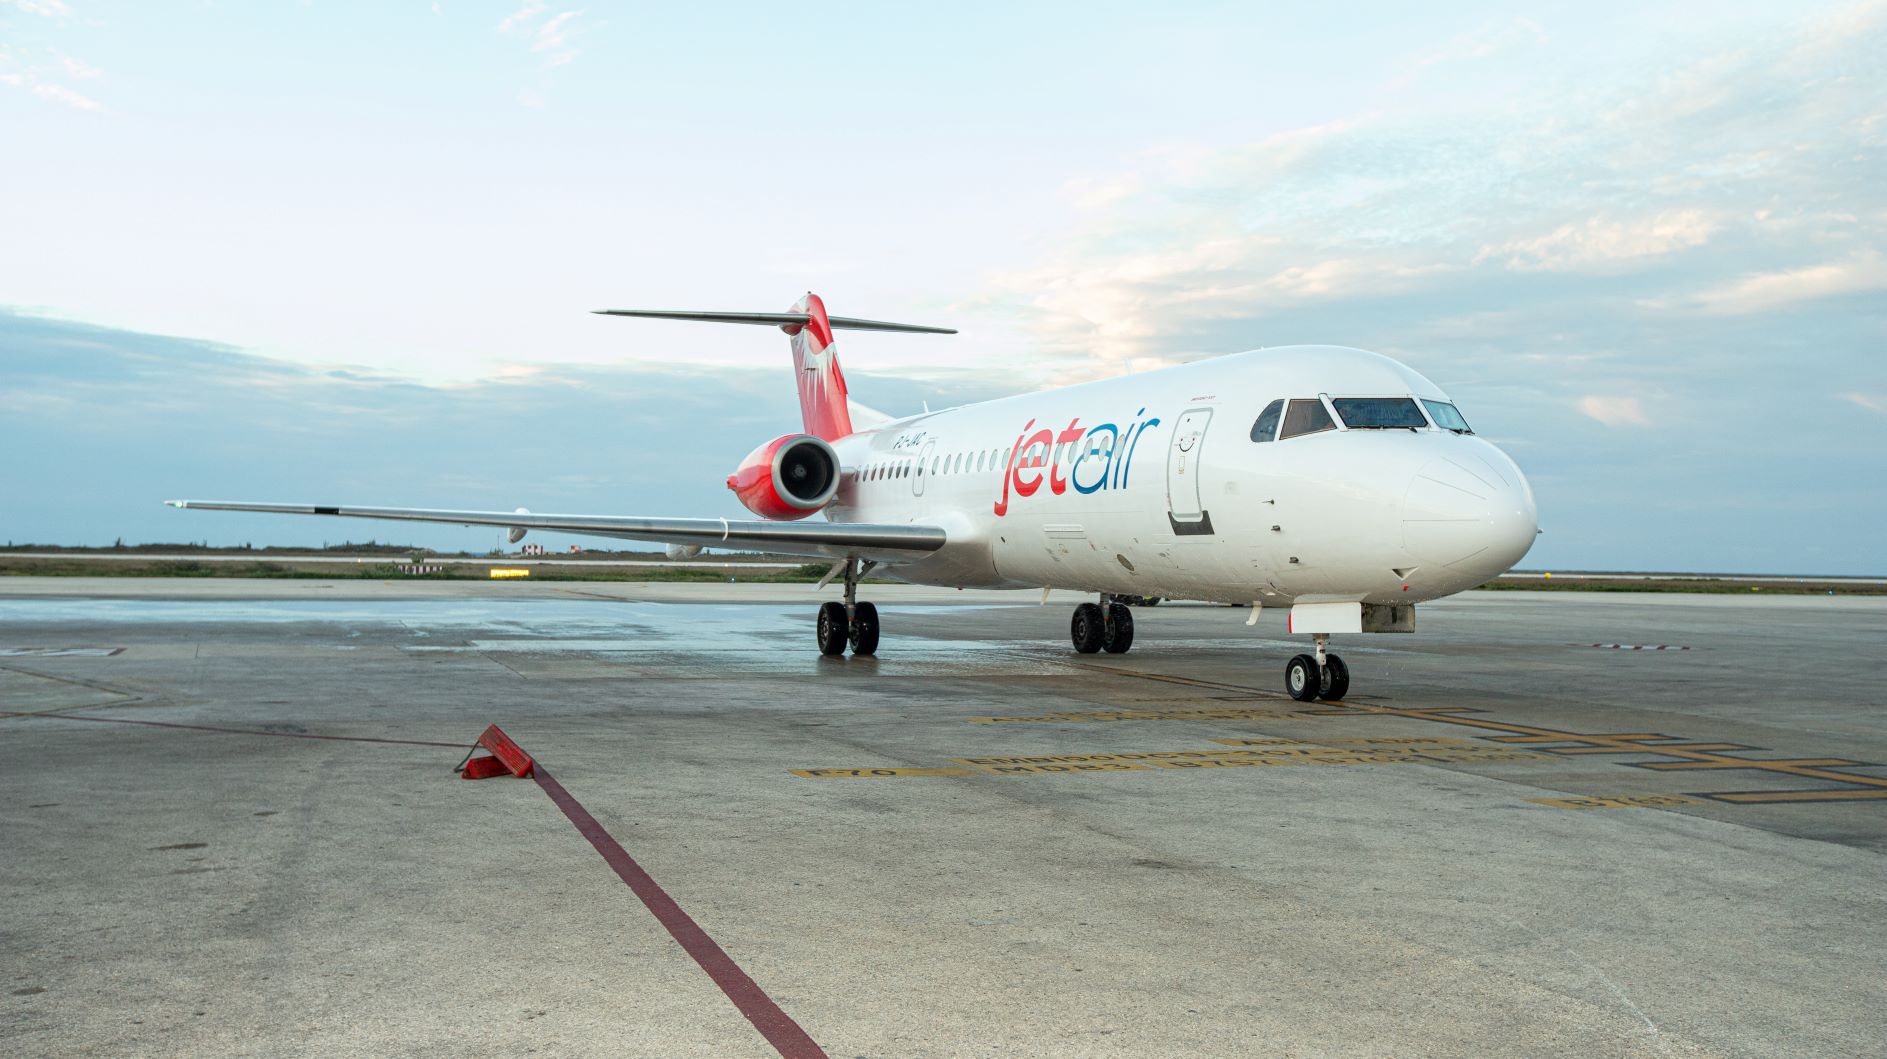 Celebrating Jetair’s inaugural flight on the Curaçao – Jamaica route